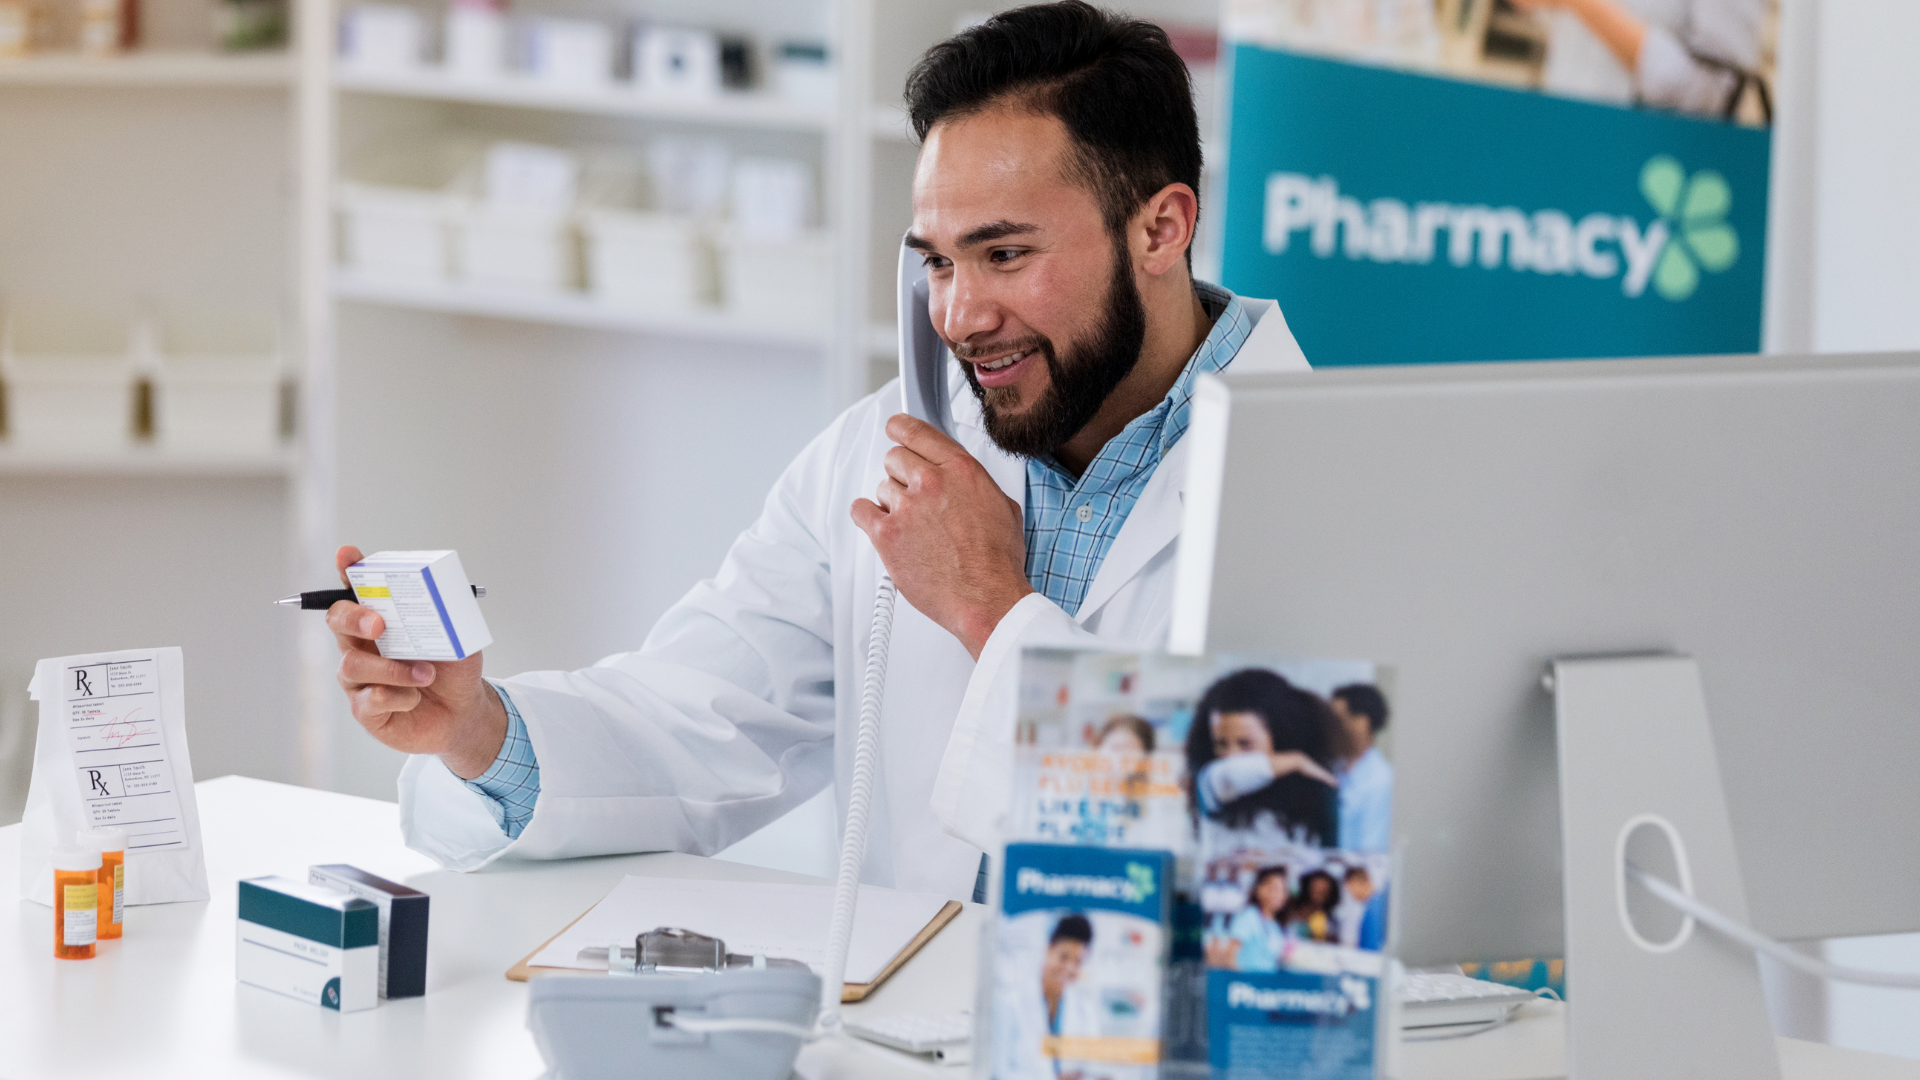 Family-Owned Pharmacy Reduces Surplus by 73% in Six Months, Dramatically Improving Liquidity